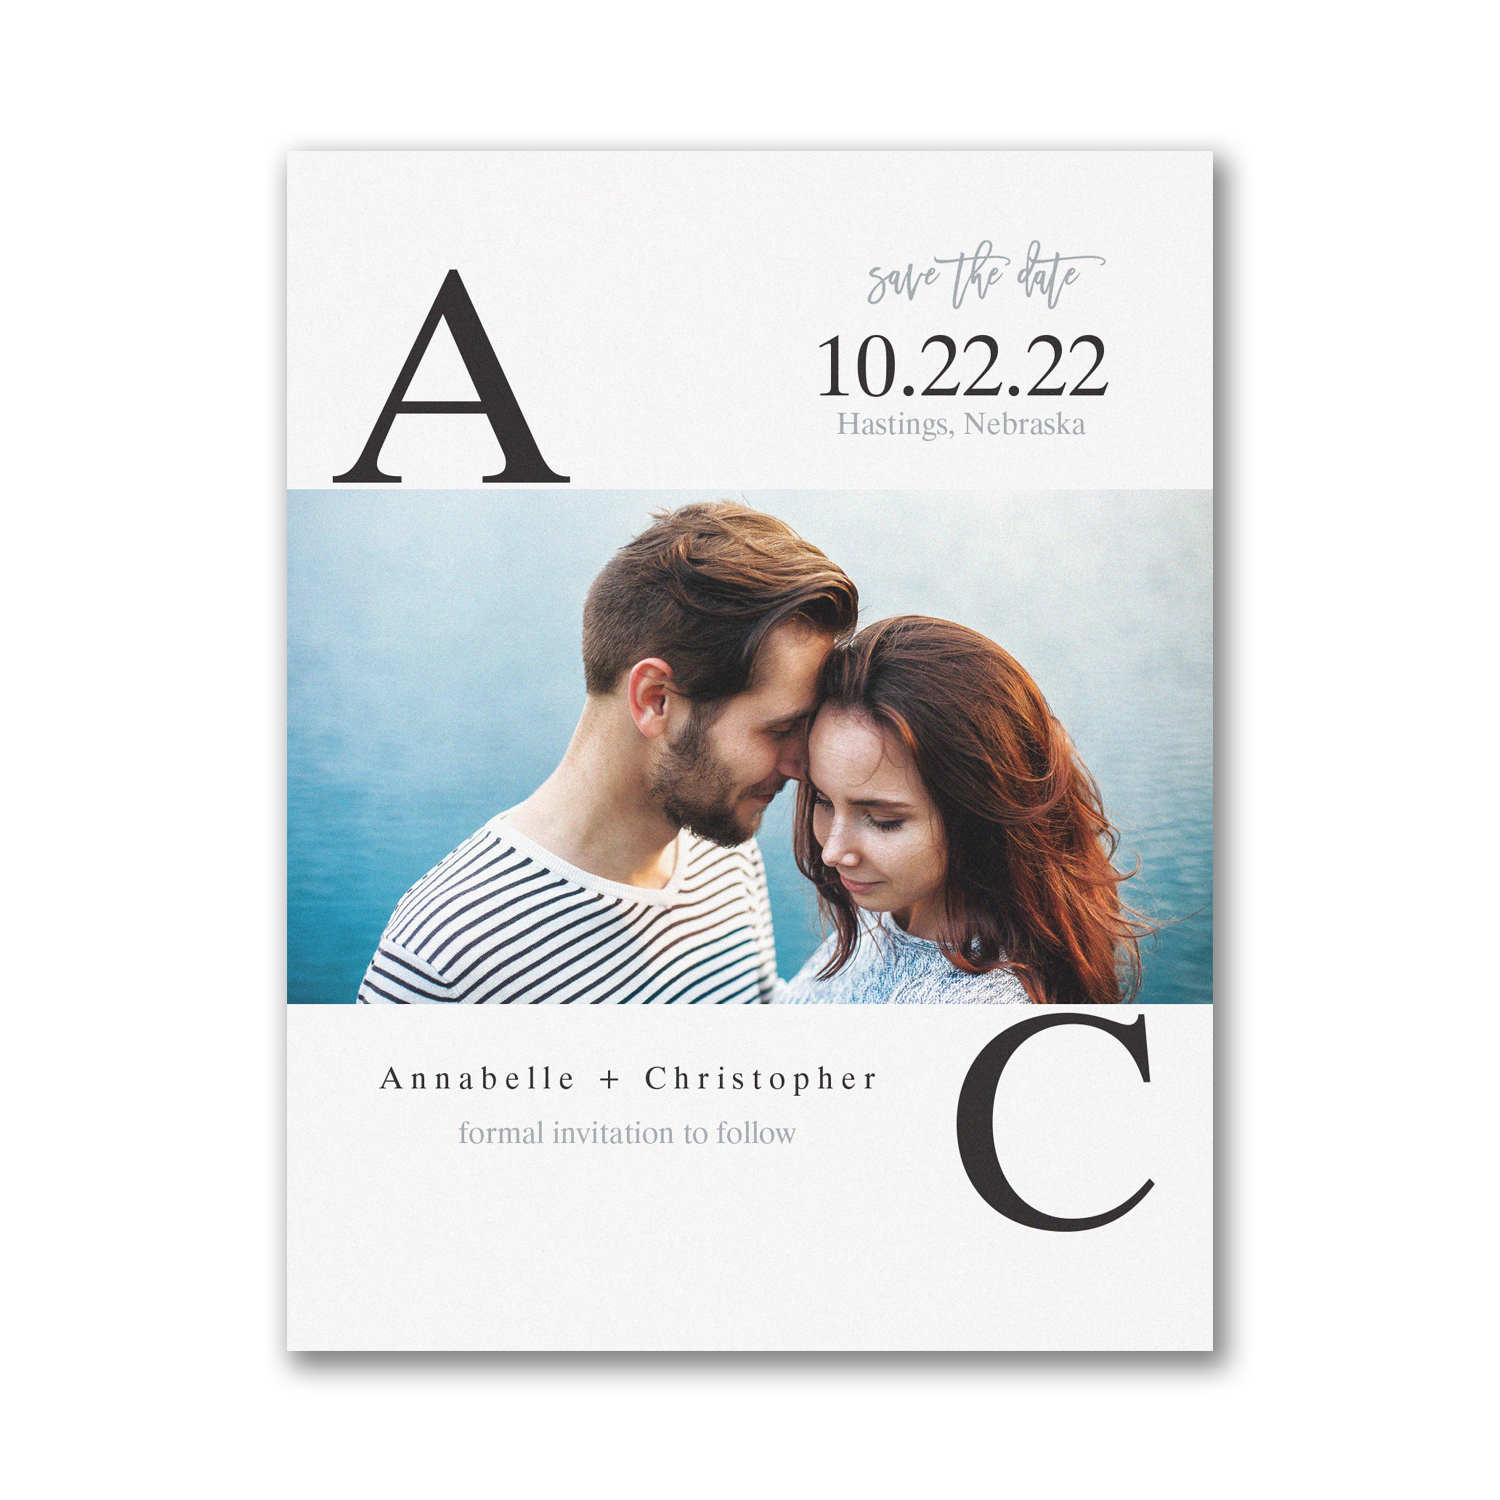 Broad Initials photo save the date carlson craft